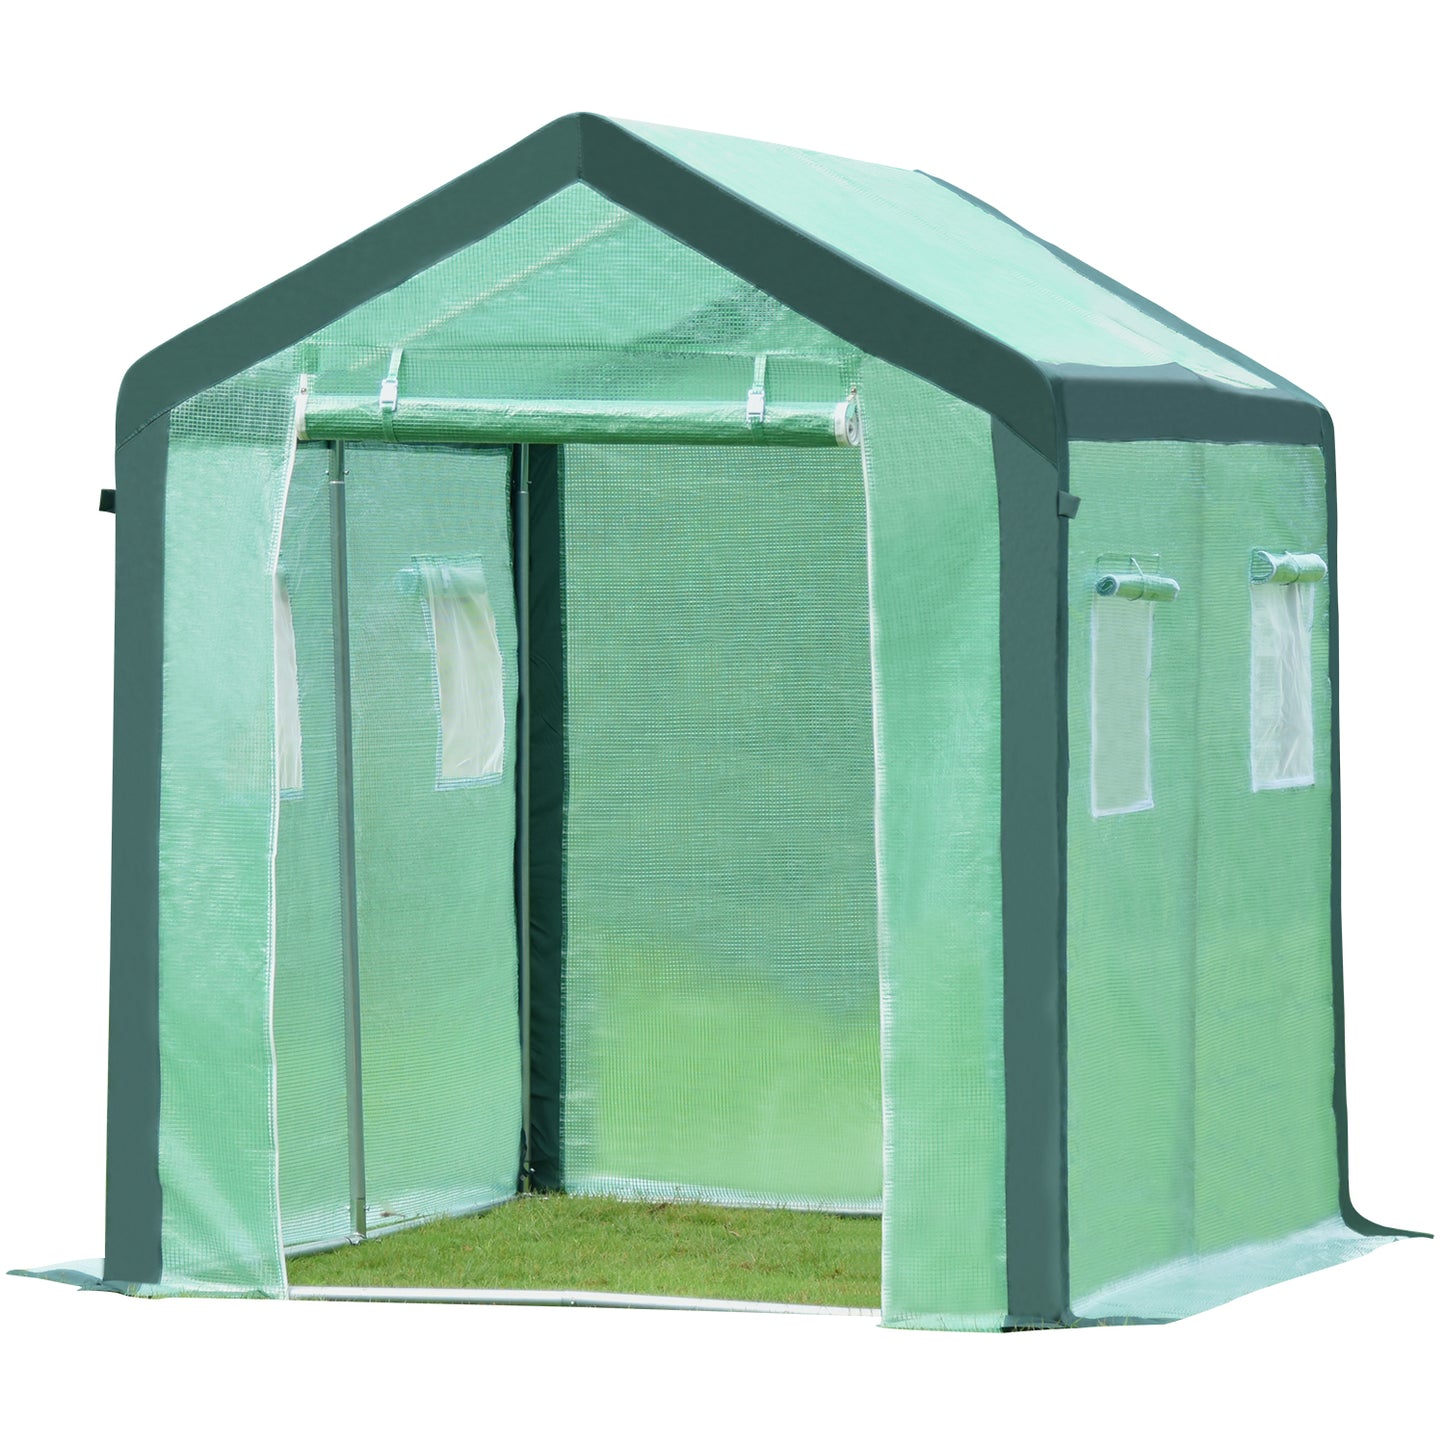 Greenhouse, 8.2' X 5.9' X 5.7' Portable Green Houses Tunnel Tent, Large Walk-in Heavy Duty Green House with 2 Zipper Entry Doors and 4 Roll-Up Windows for Patio Backyard Garden, Green, LJ1829